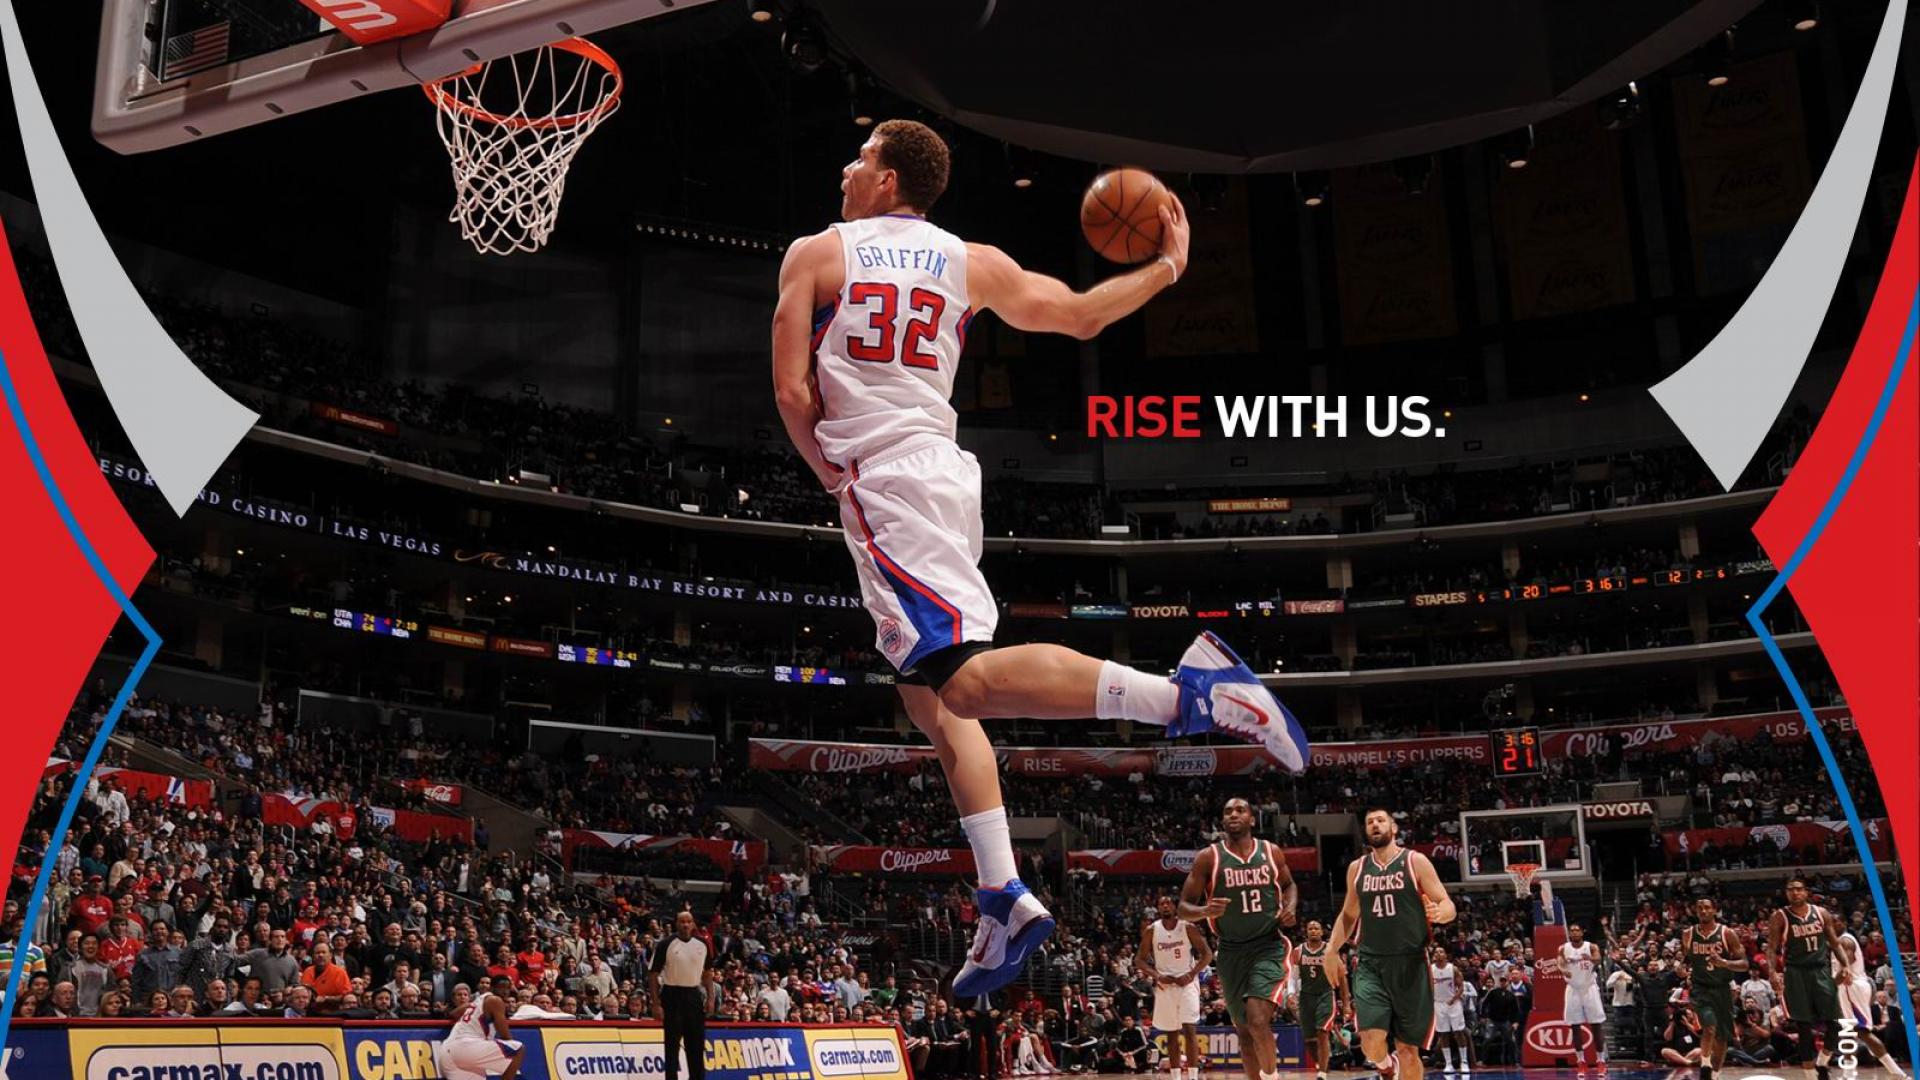 los, Angeles, Clippers, Basketball, Nba,  1 Wallpaper